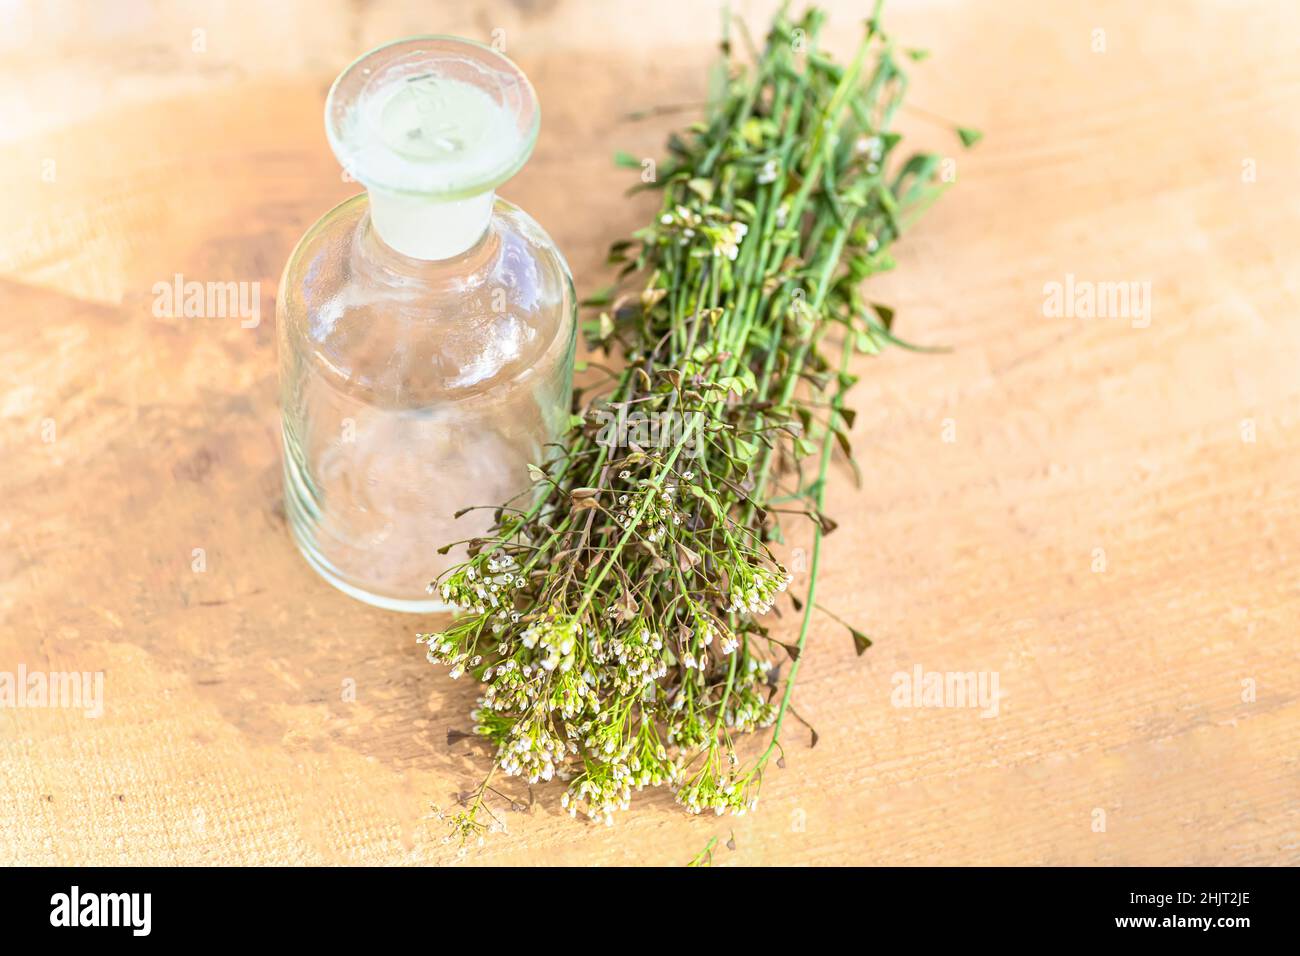 Bunch of shepherds purse, bottle with tincture or elixir for the preparation of non-traditional medicine of bursa pastoris medicinal herbs. Homeopathy Stock Photo